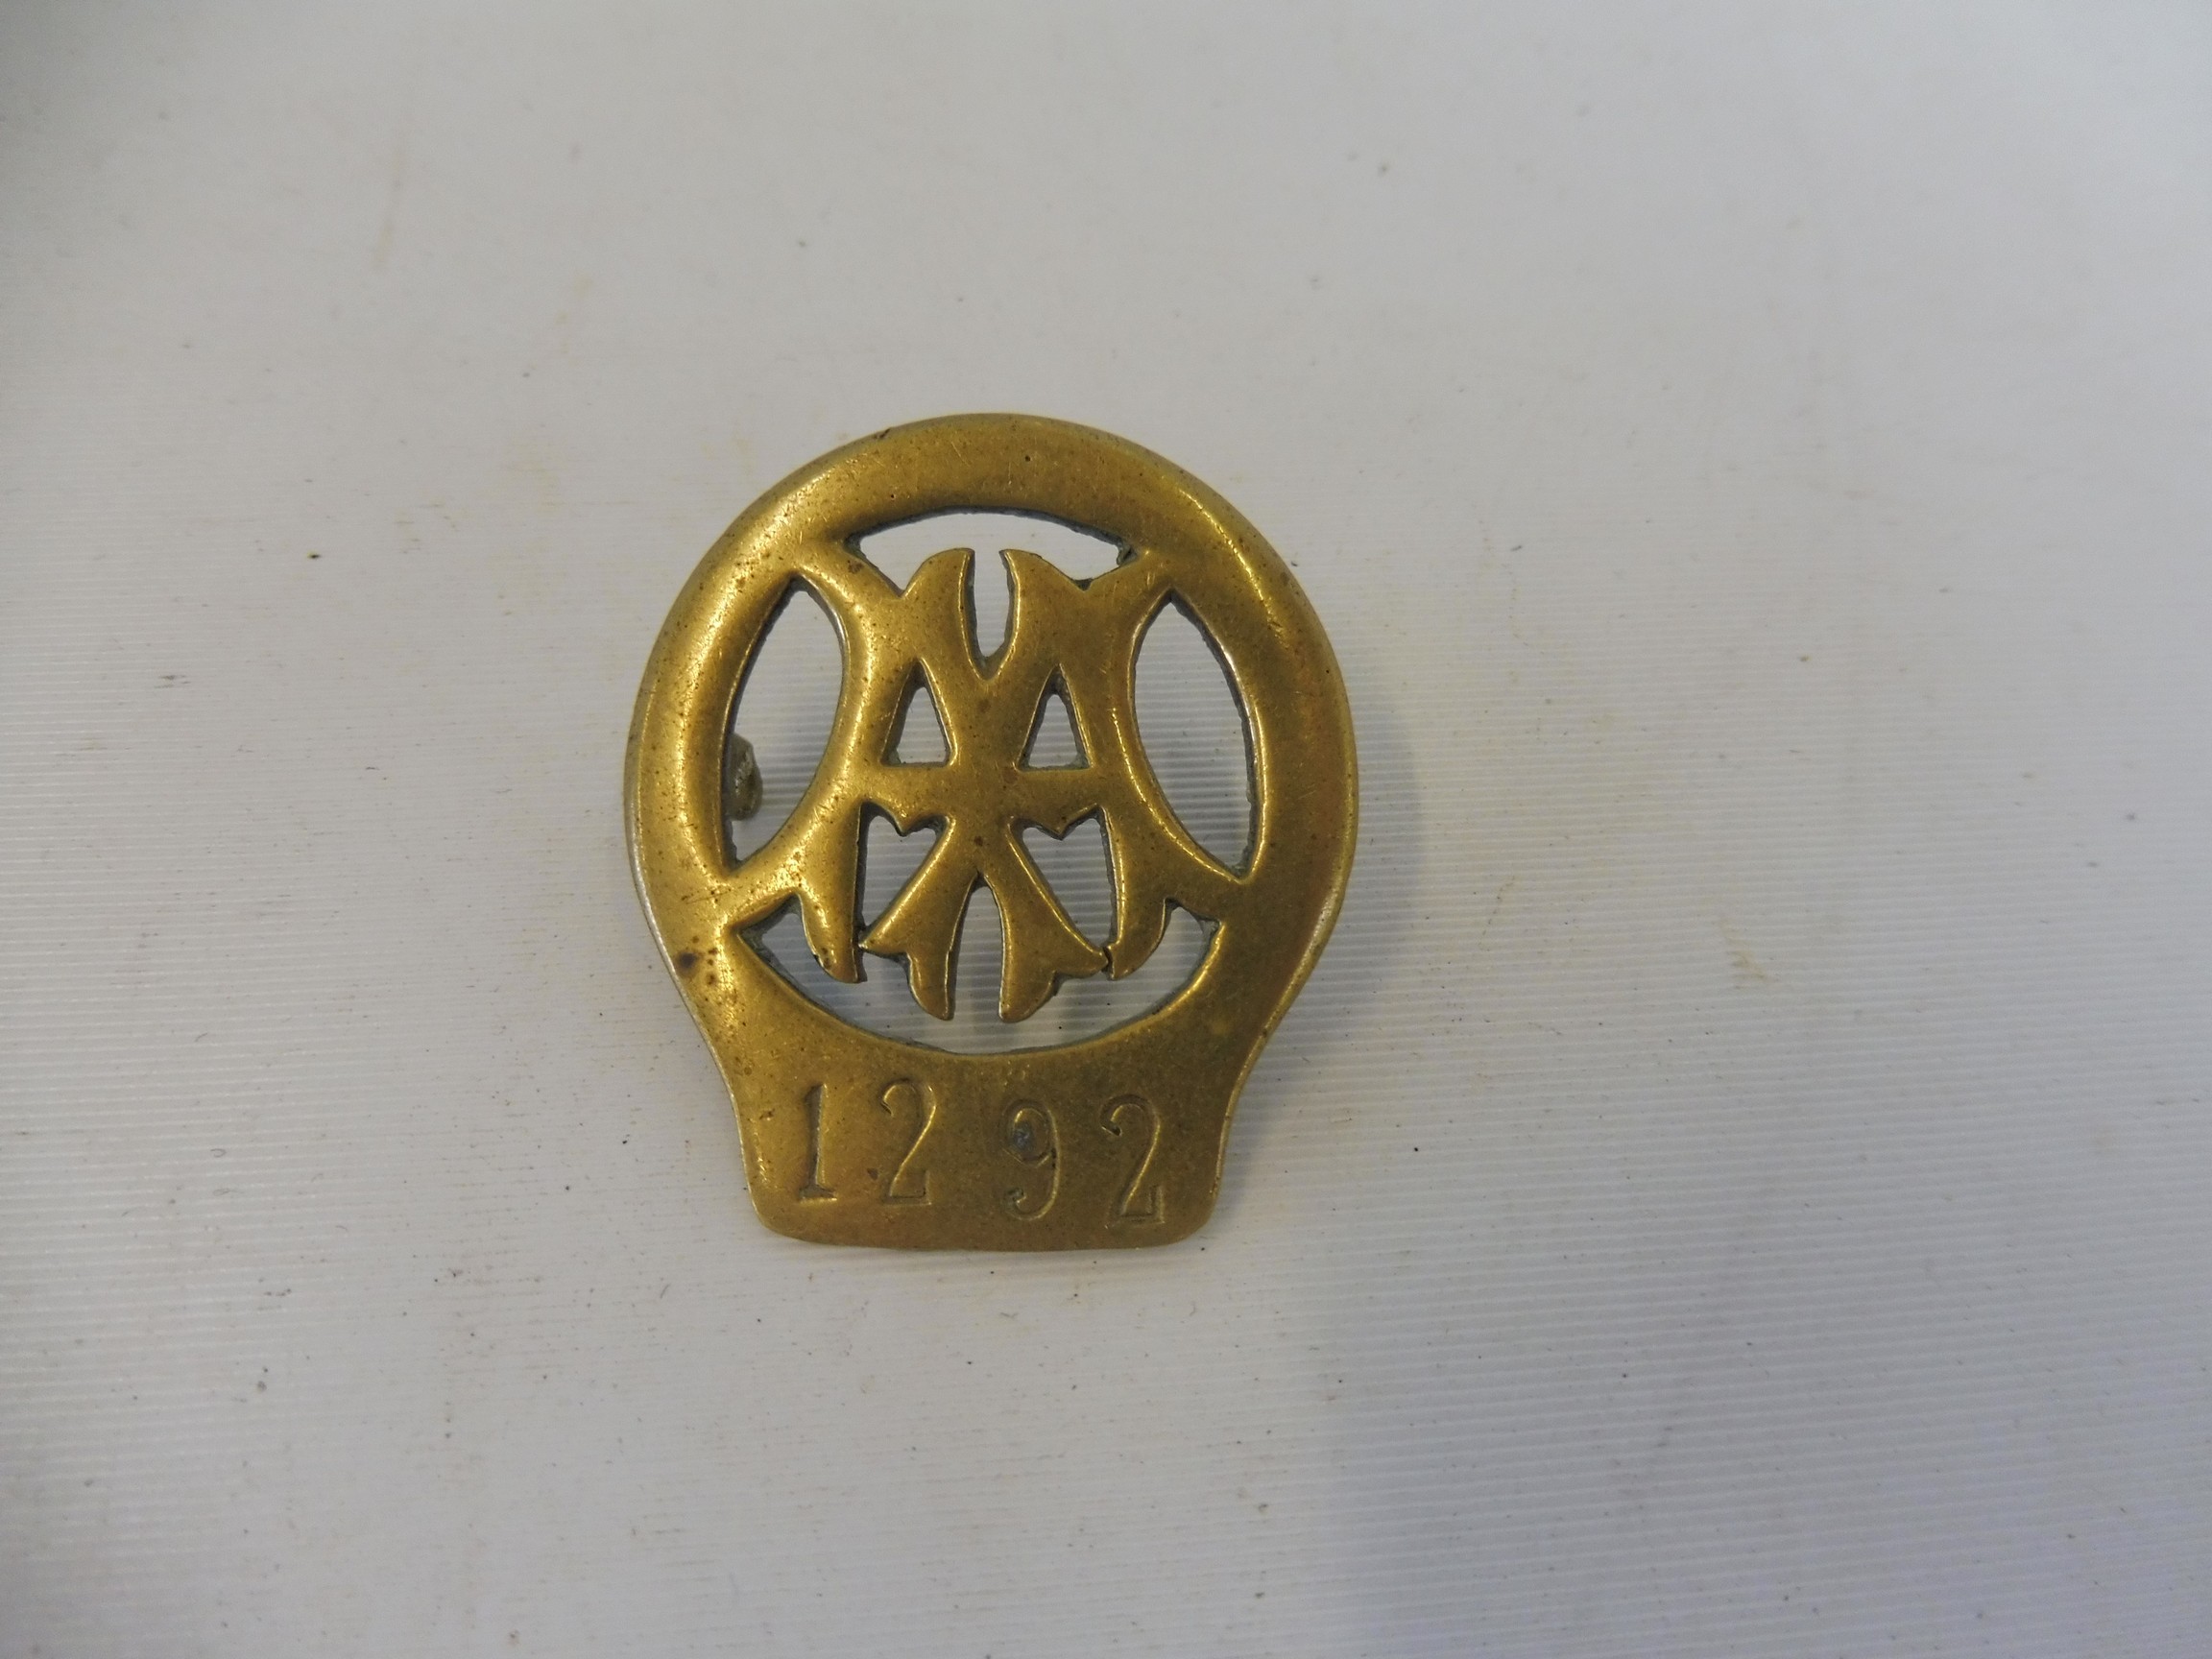 An early AA cap badge, bearing the number 1292.